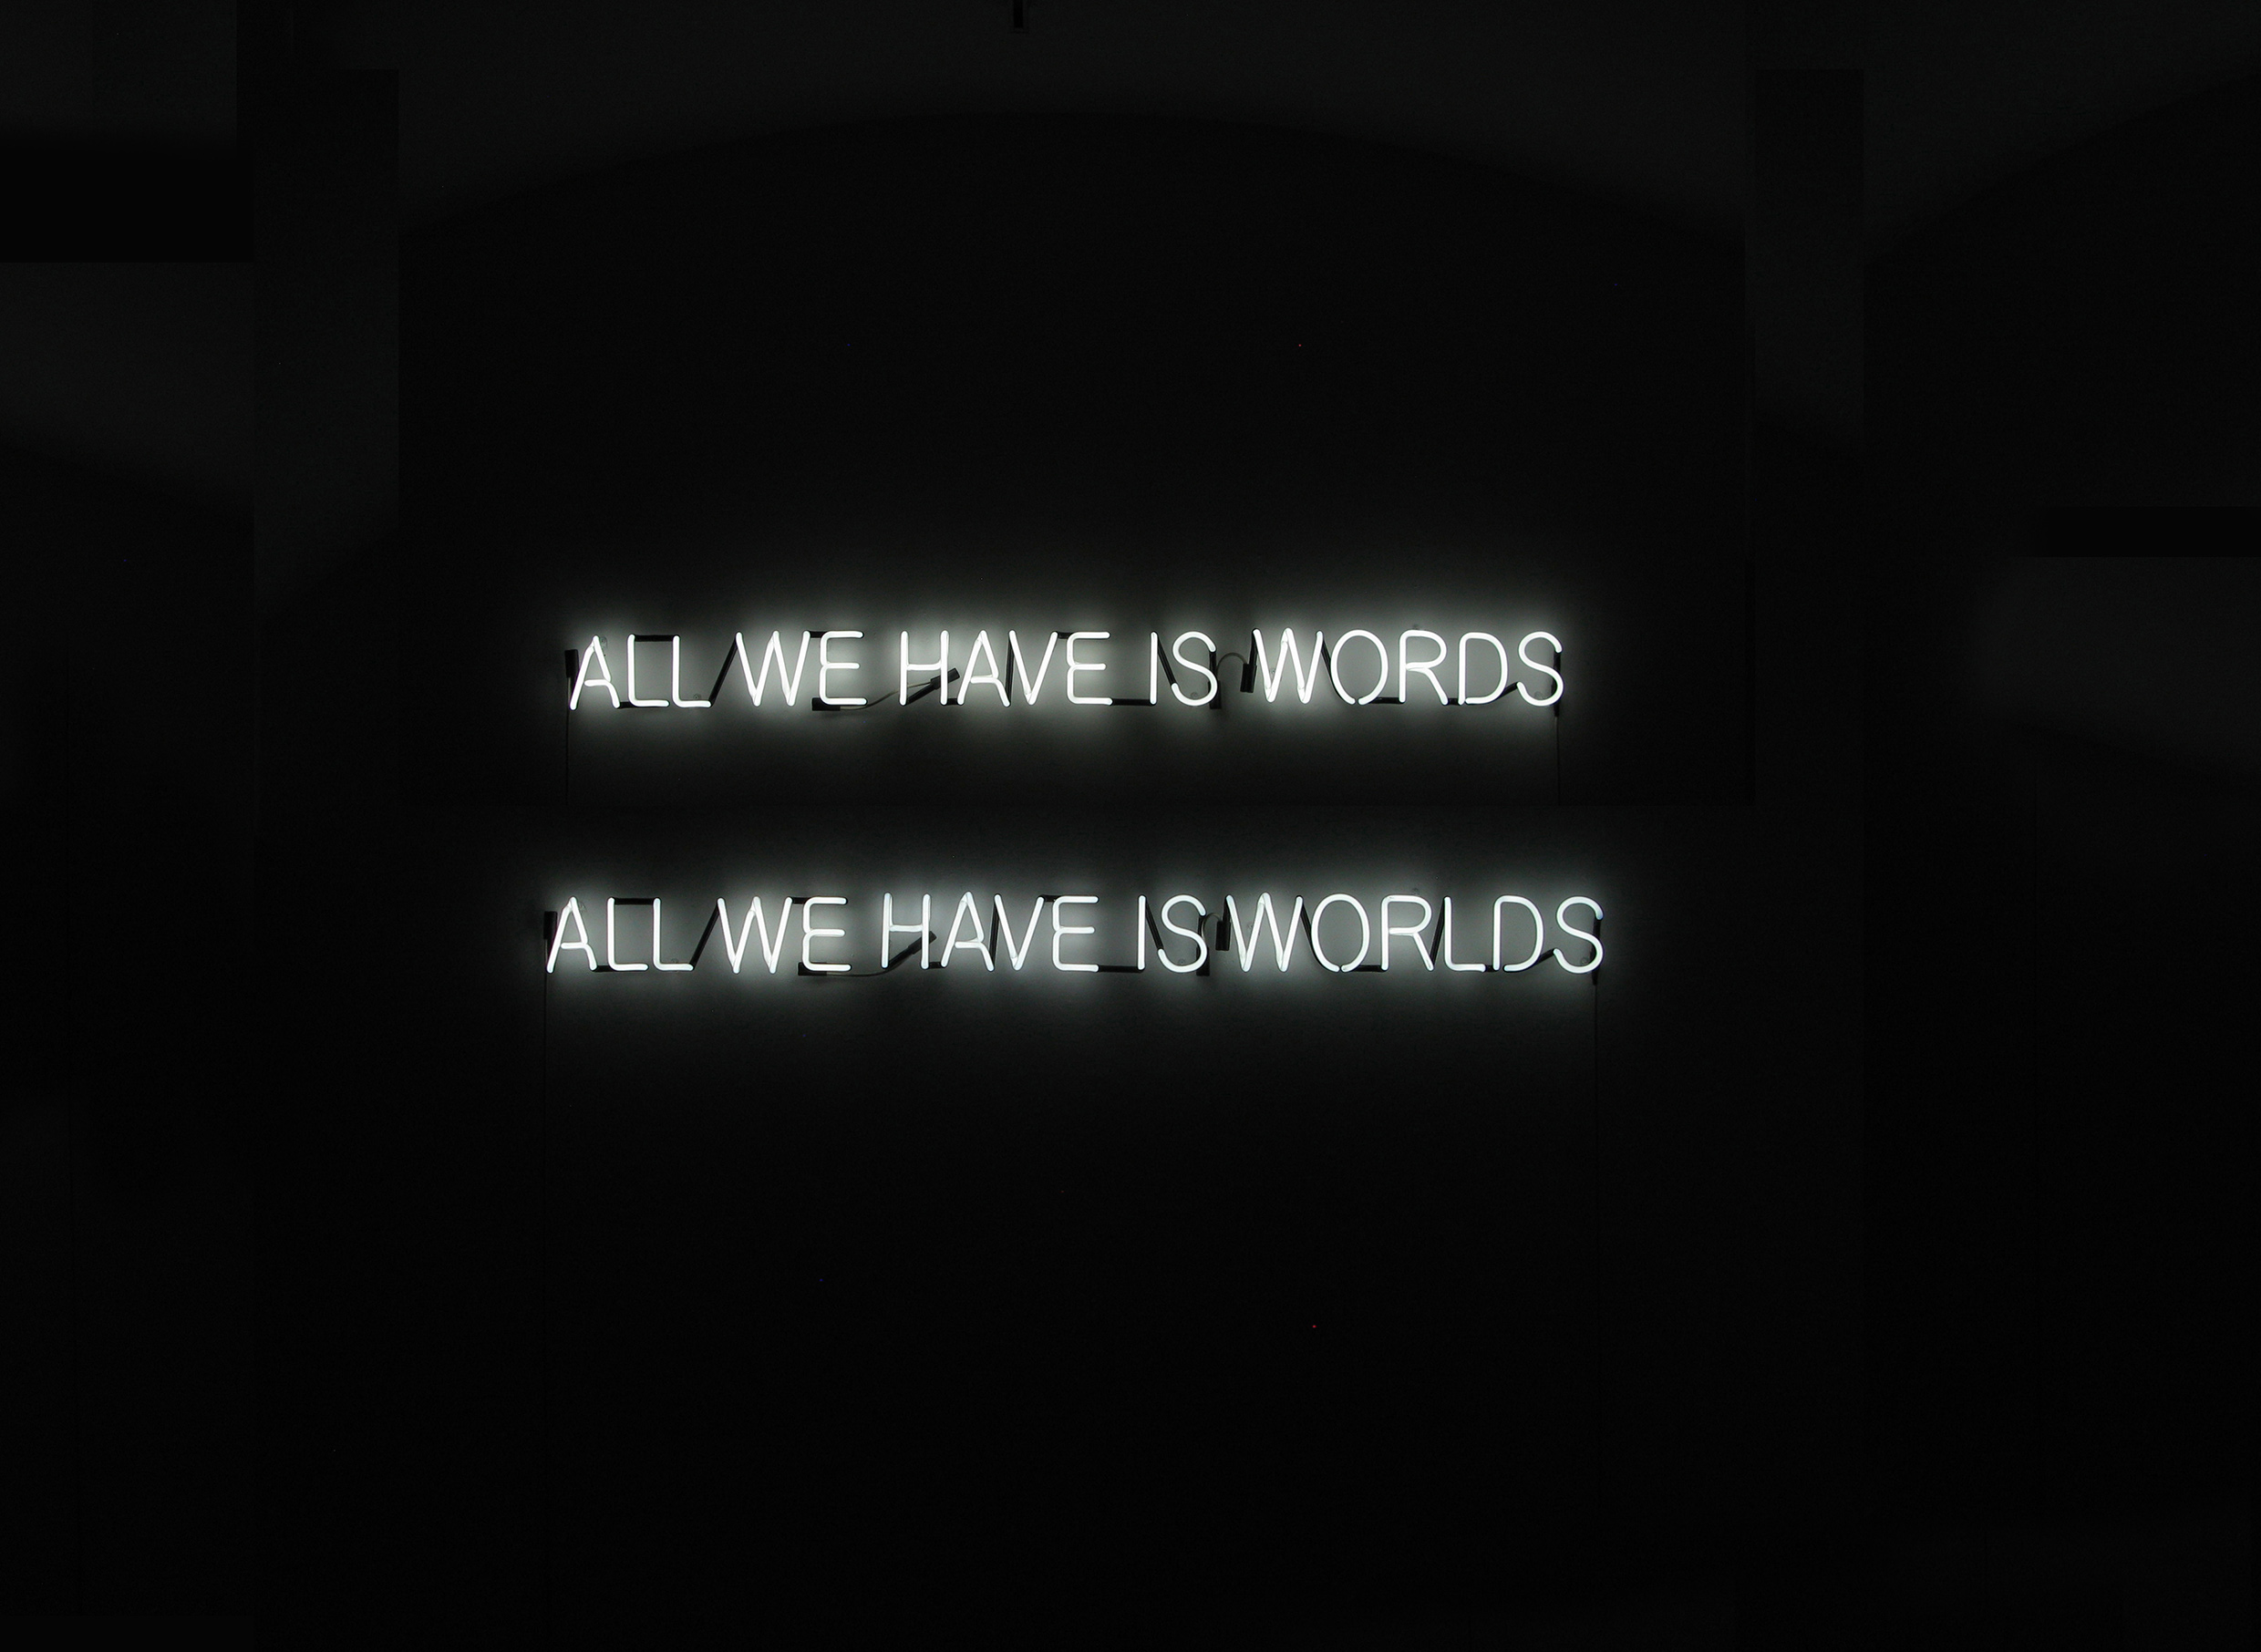 All We Have Tim Etchells Neon 2011 Image Courtesy of the Artist 002